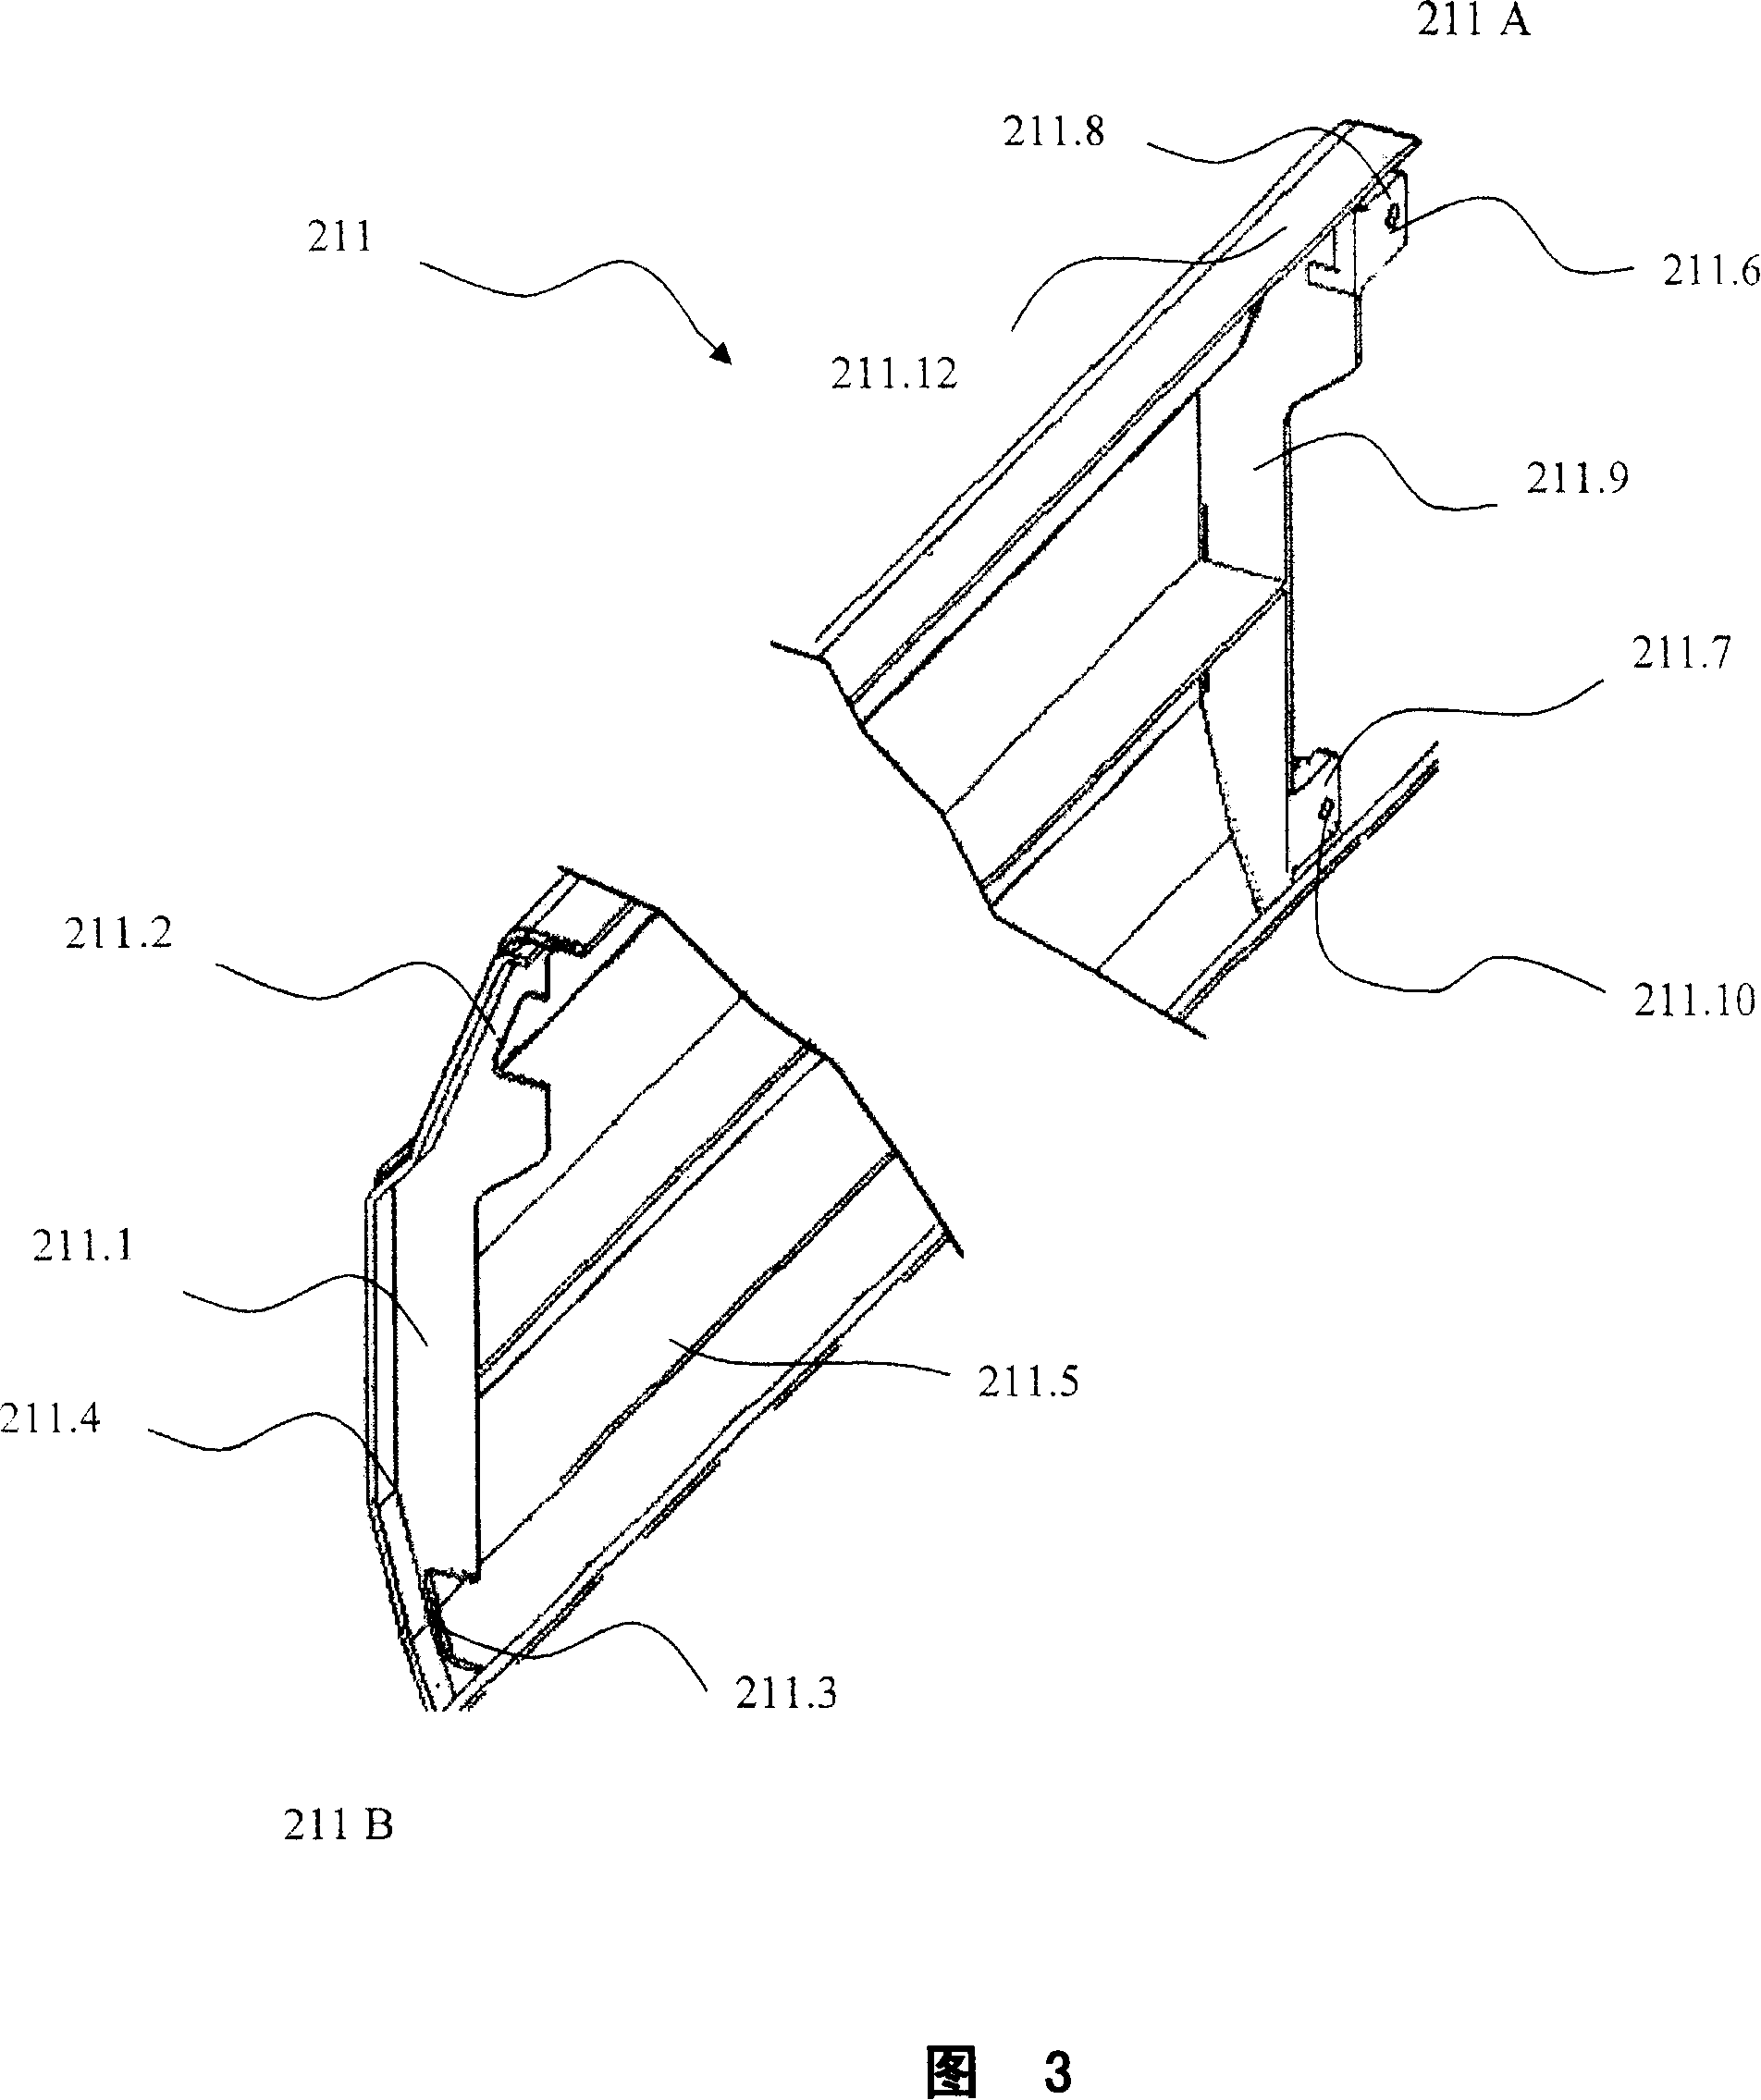 Self-supporting gate or gate sliding on a rail